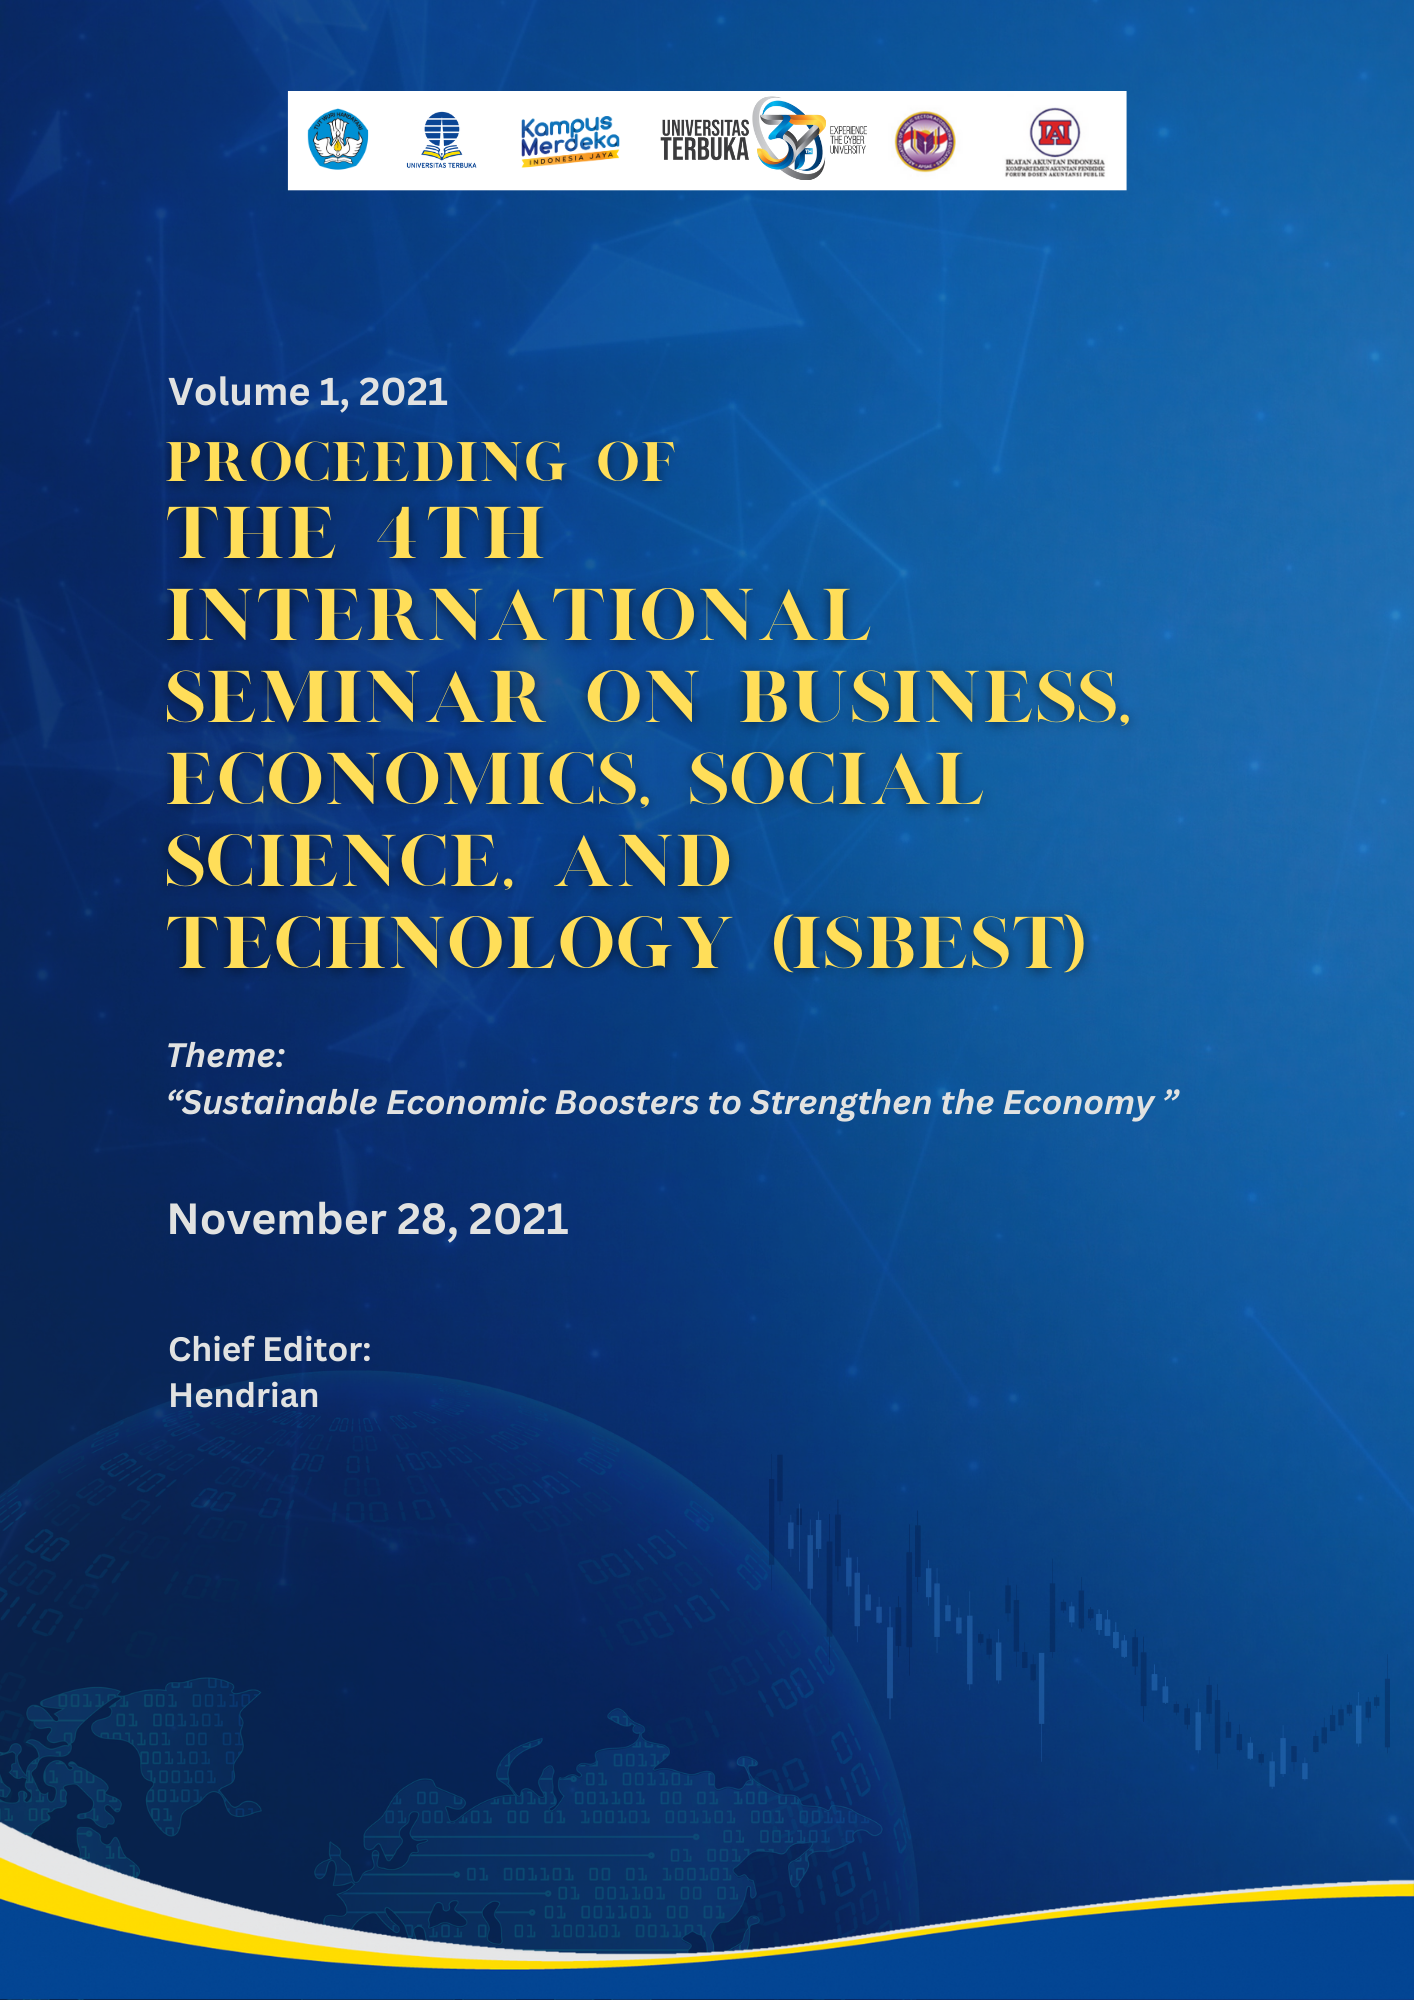                     View Vol. 1 (2021): Proceeding of The 4th International Seminar on Business, Economics, Social Science, and Technology (ISBEST)
                